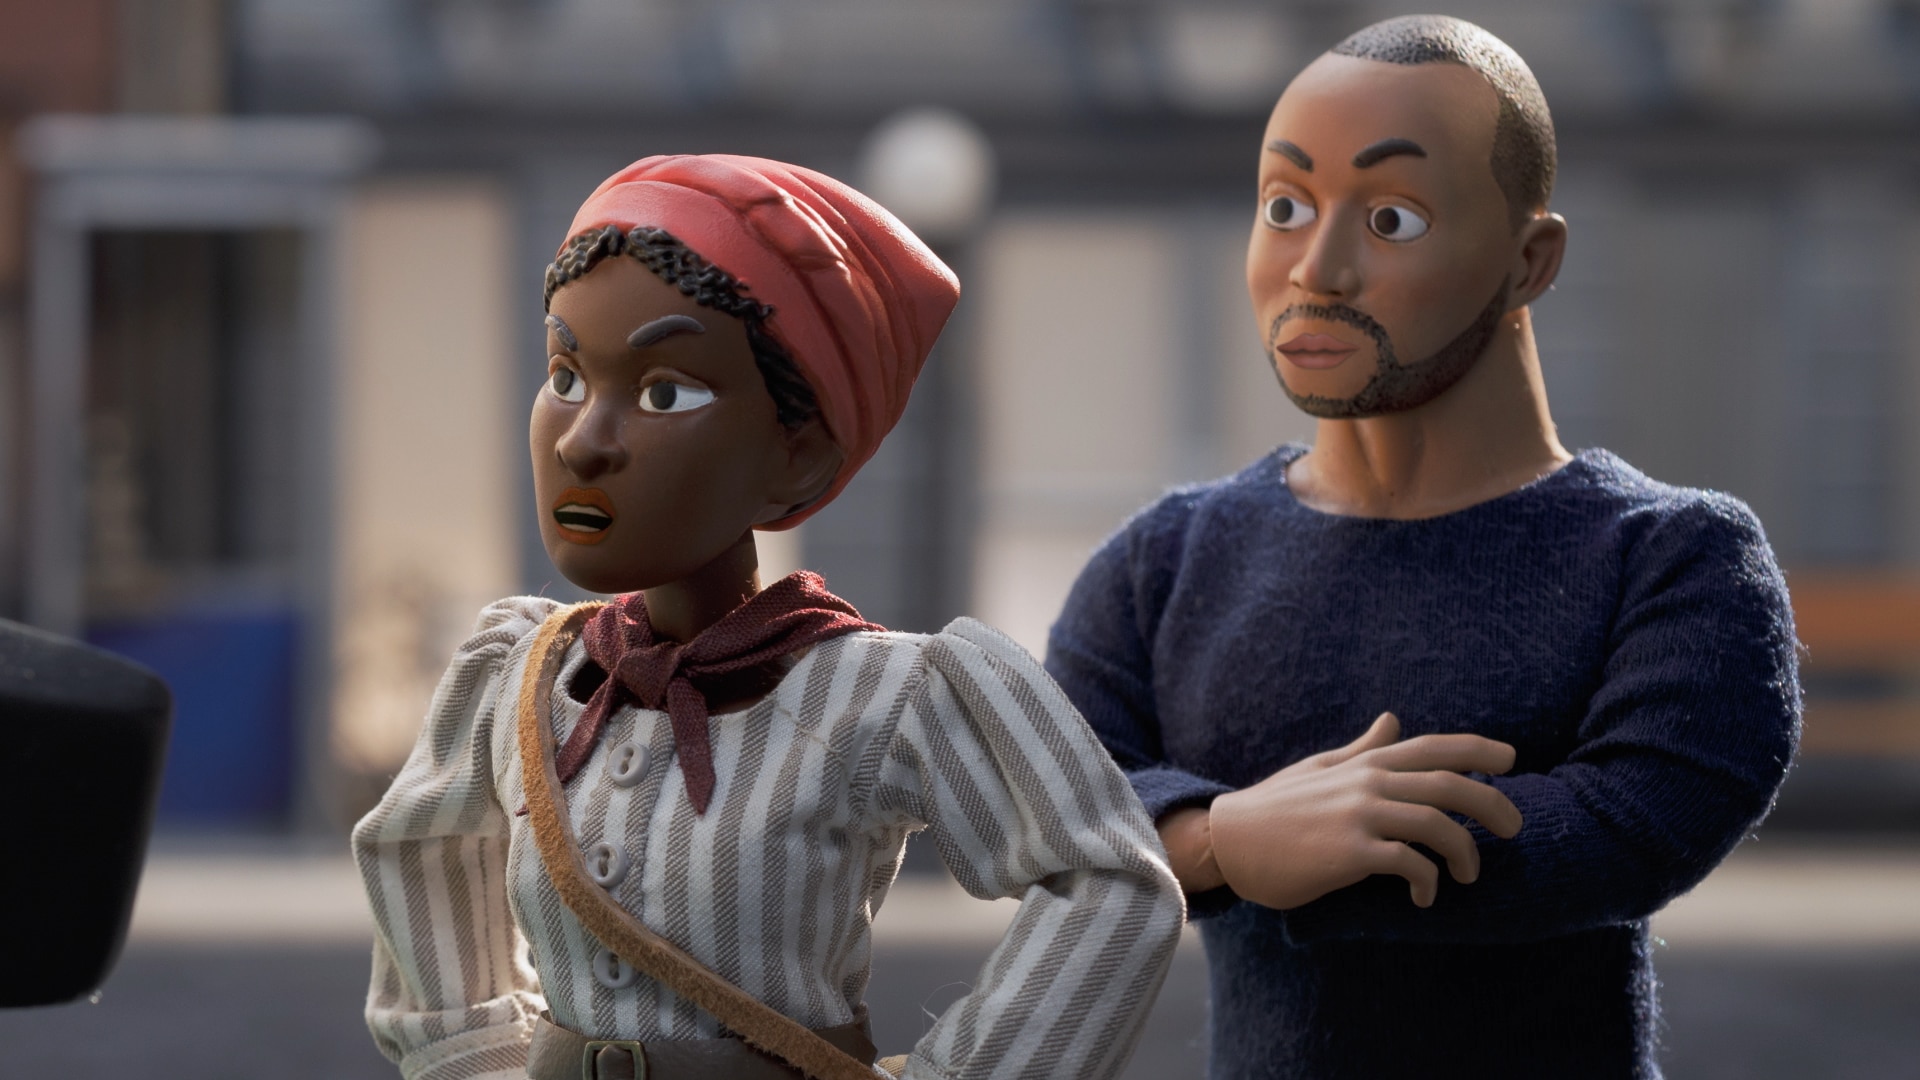 Watch Robot Chicken Episodes and Clips for Free from Adult Swim